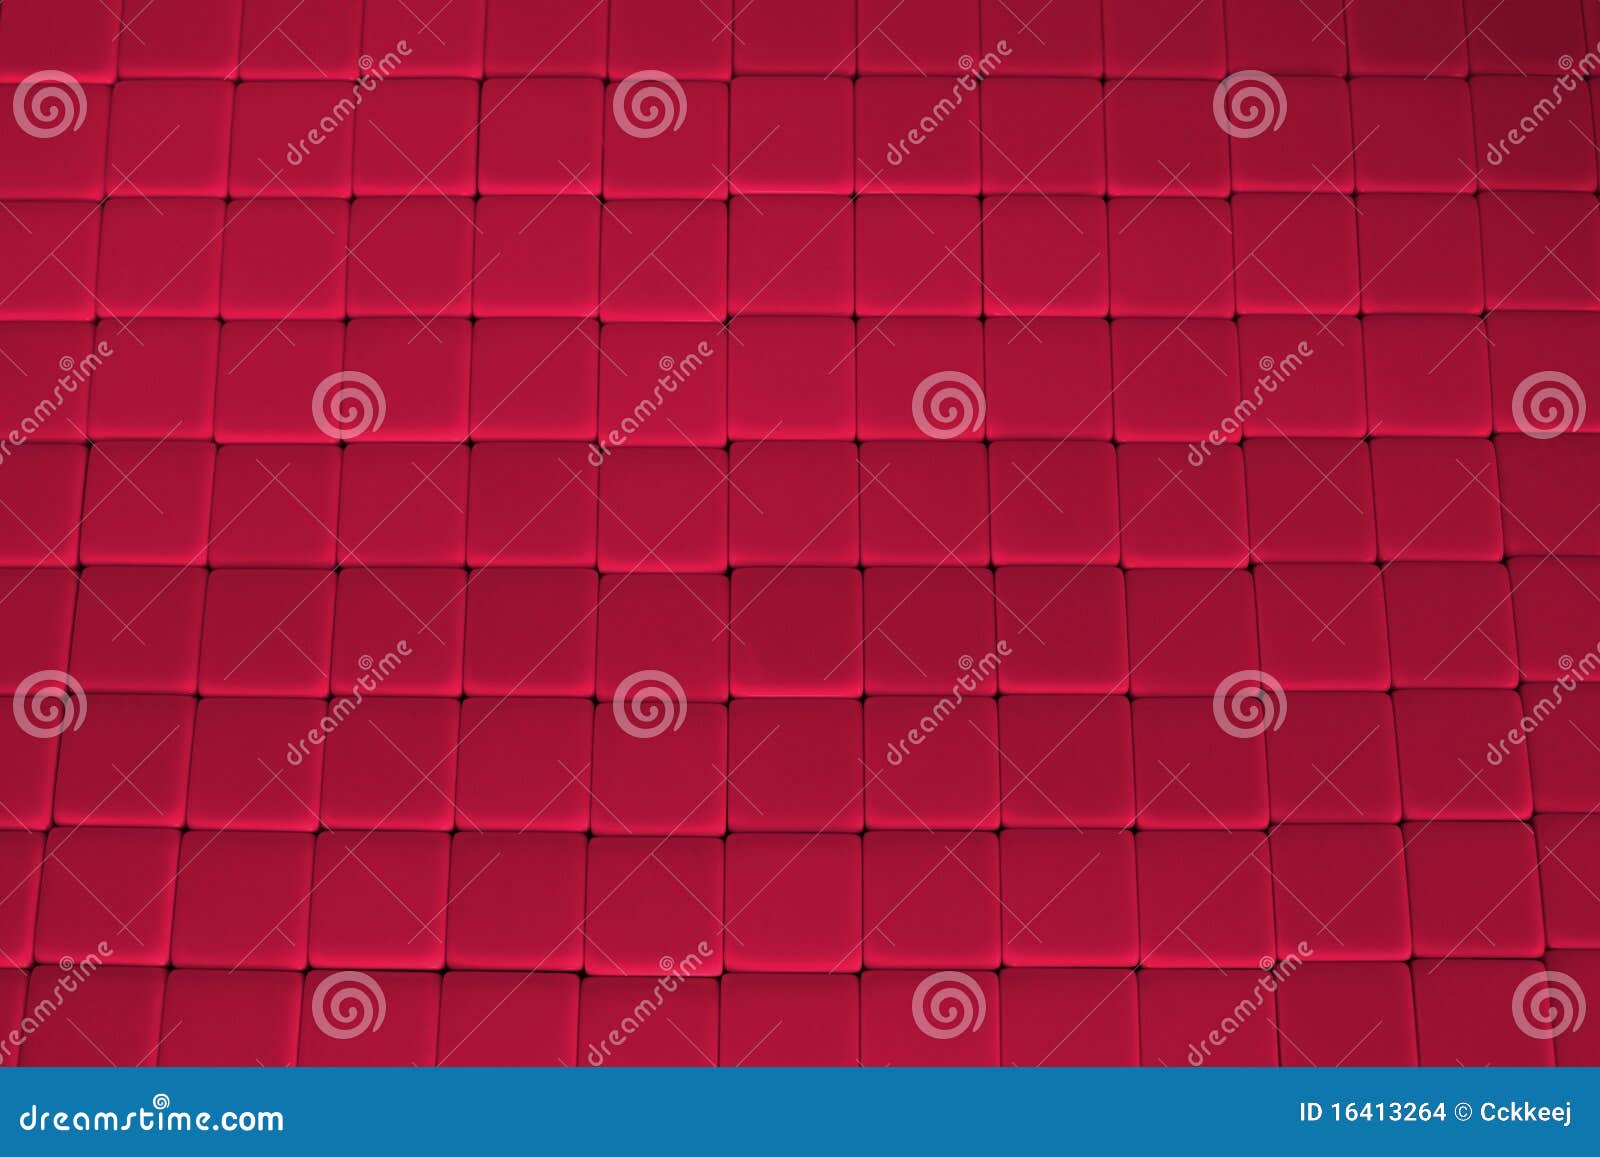 Red Tile Background 2 Stock Images - Image: 16413264